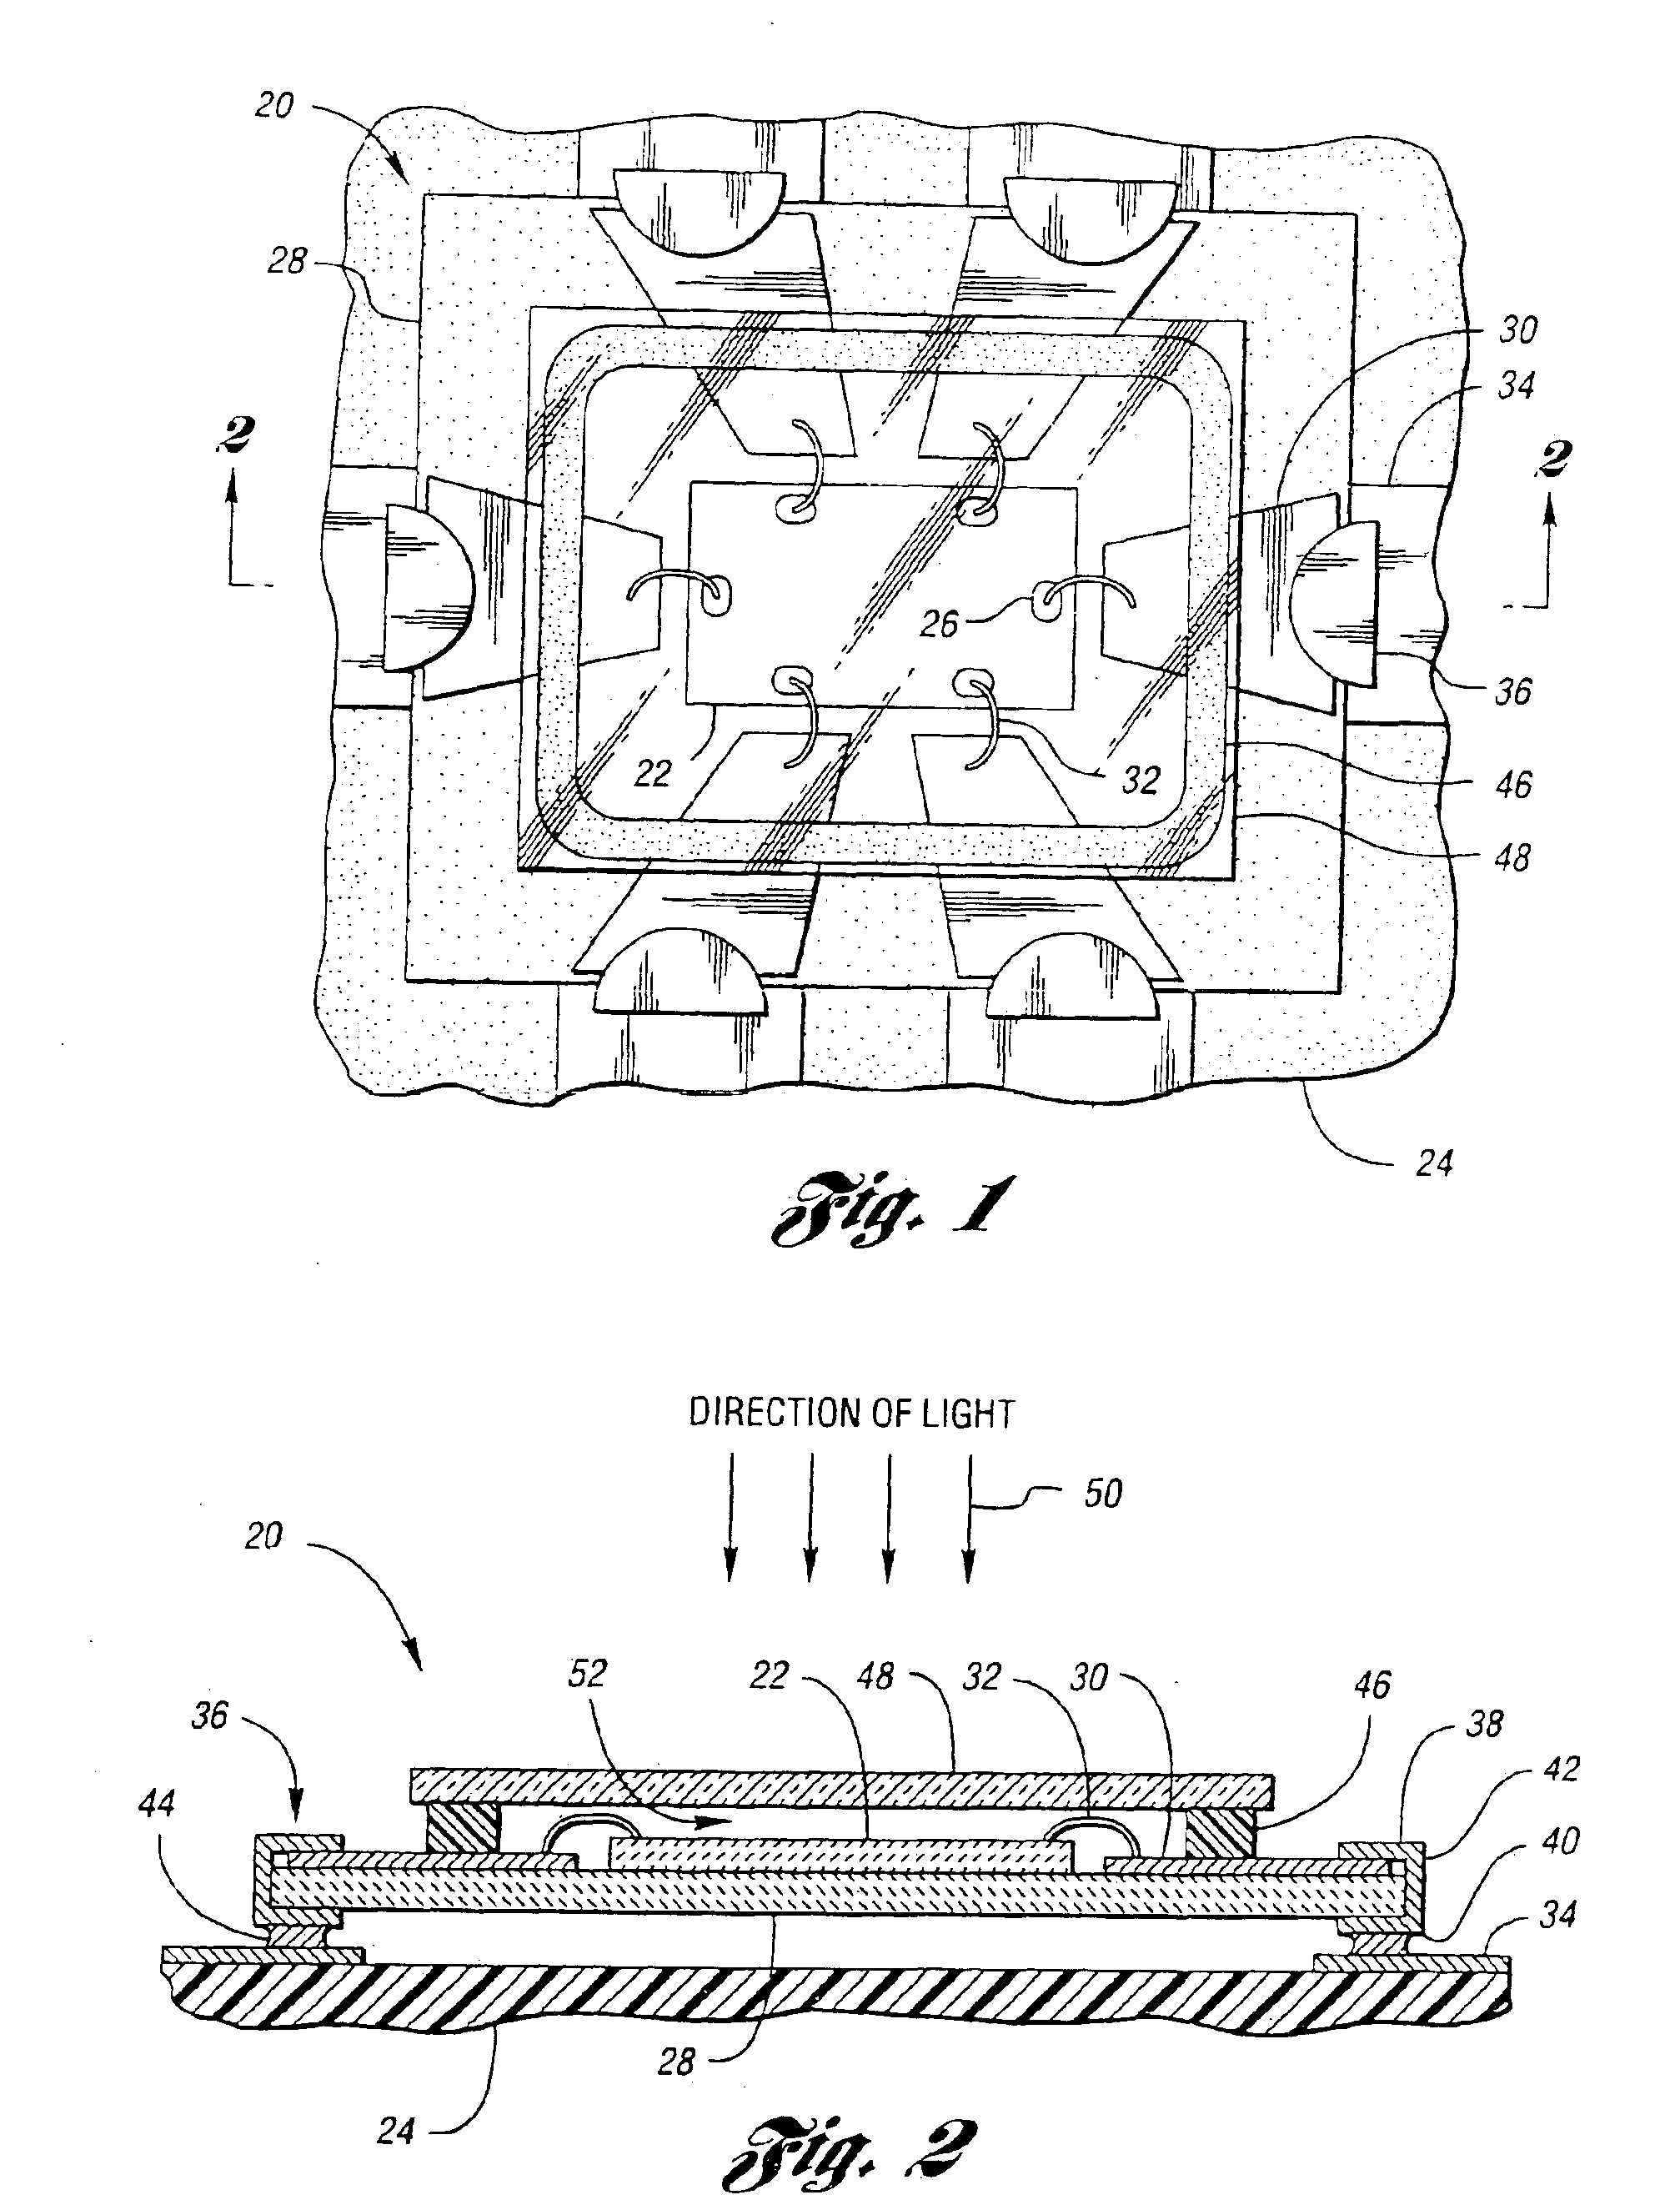 Devices incorporating electrochromic elements and optical sensors